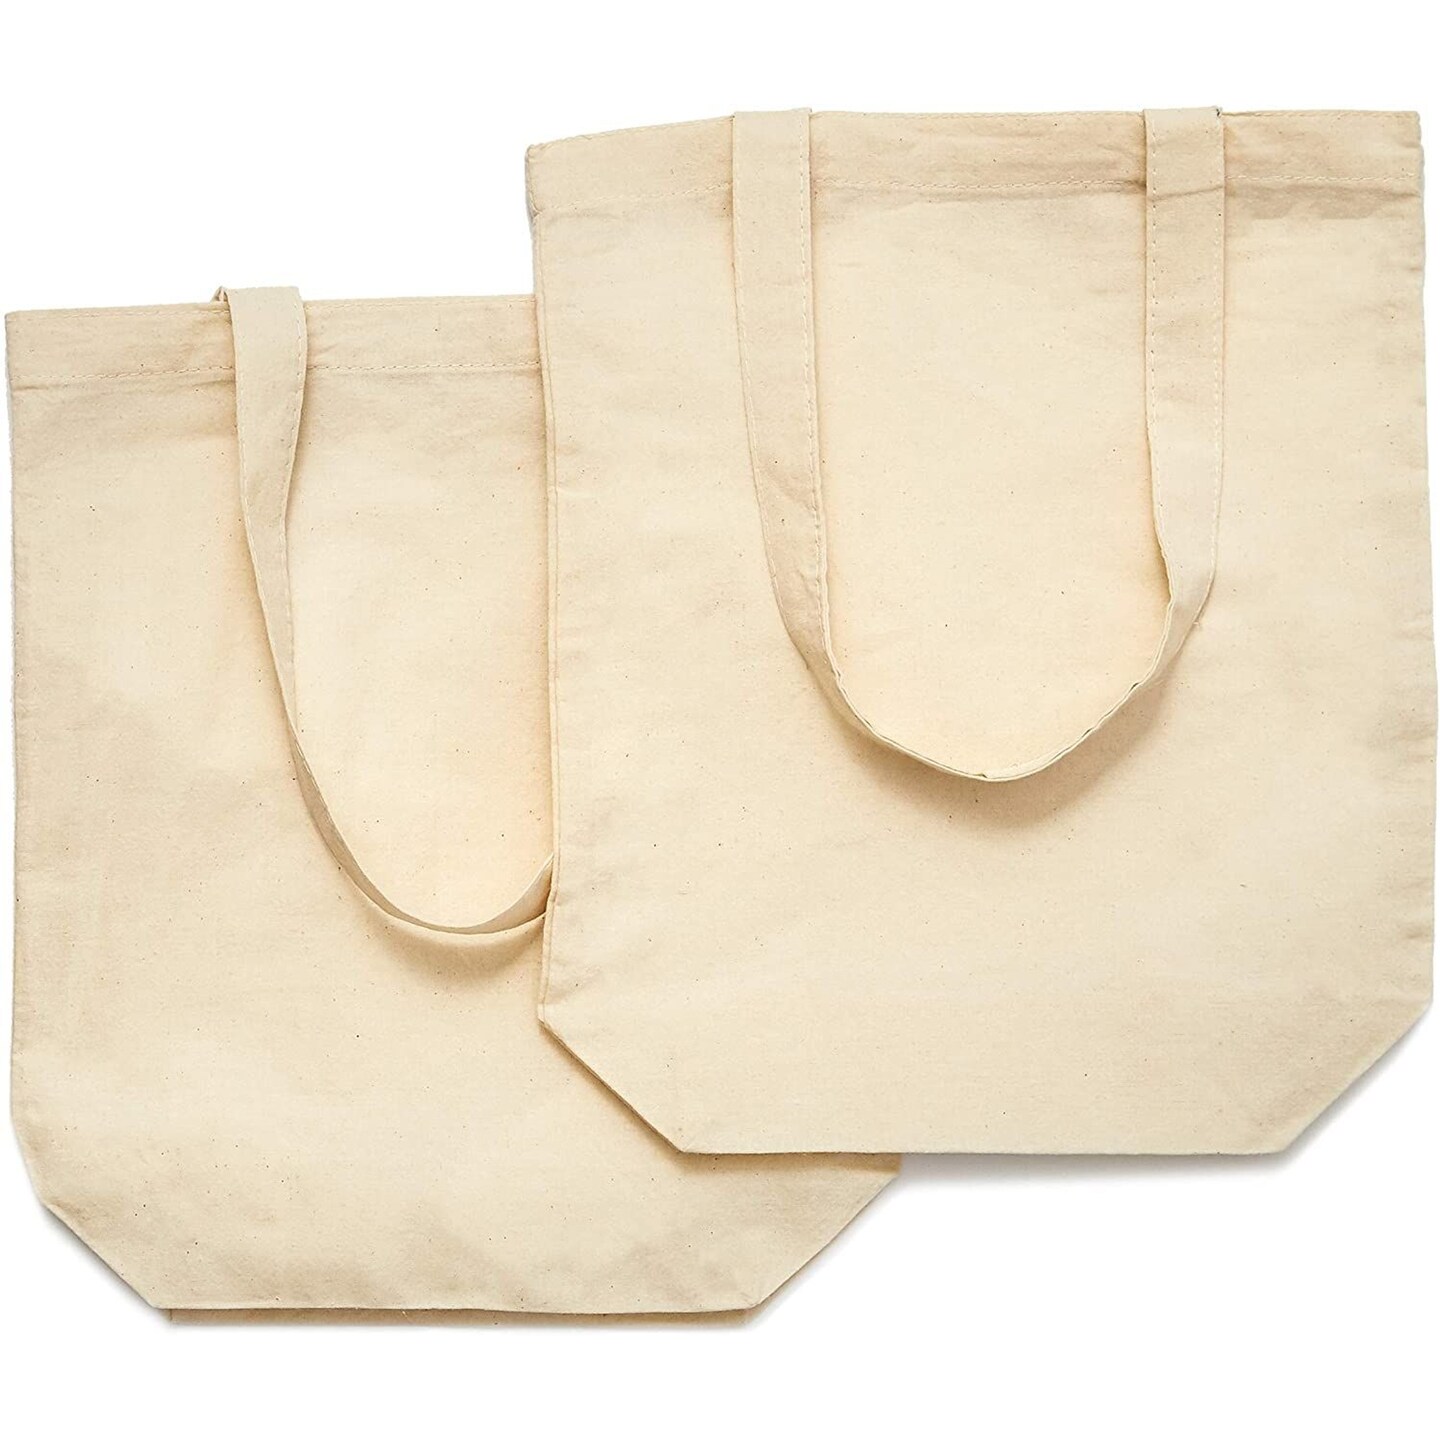 Set of 24 Bulk Blank Cotton Canvas Tote Bags for Women, DIY, Arts